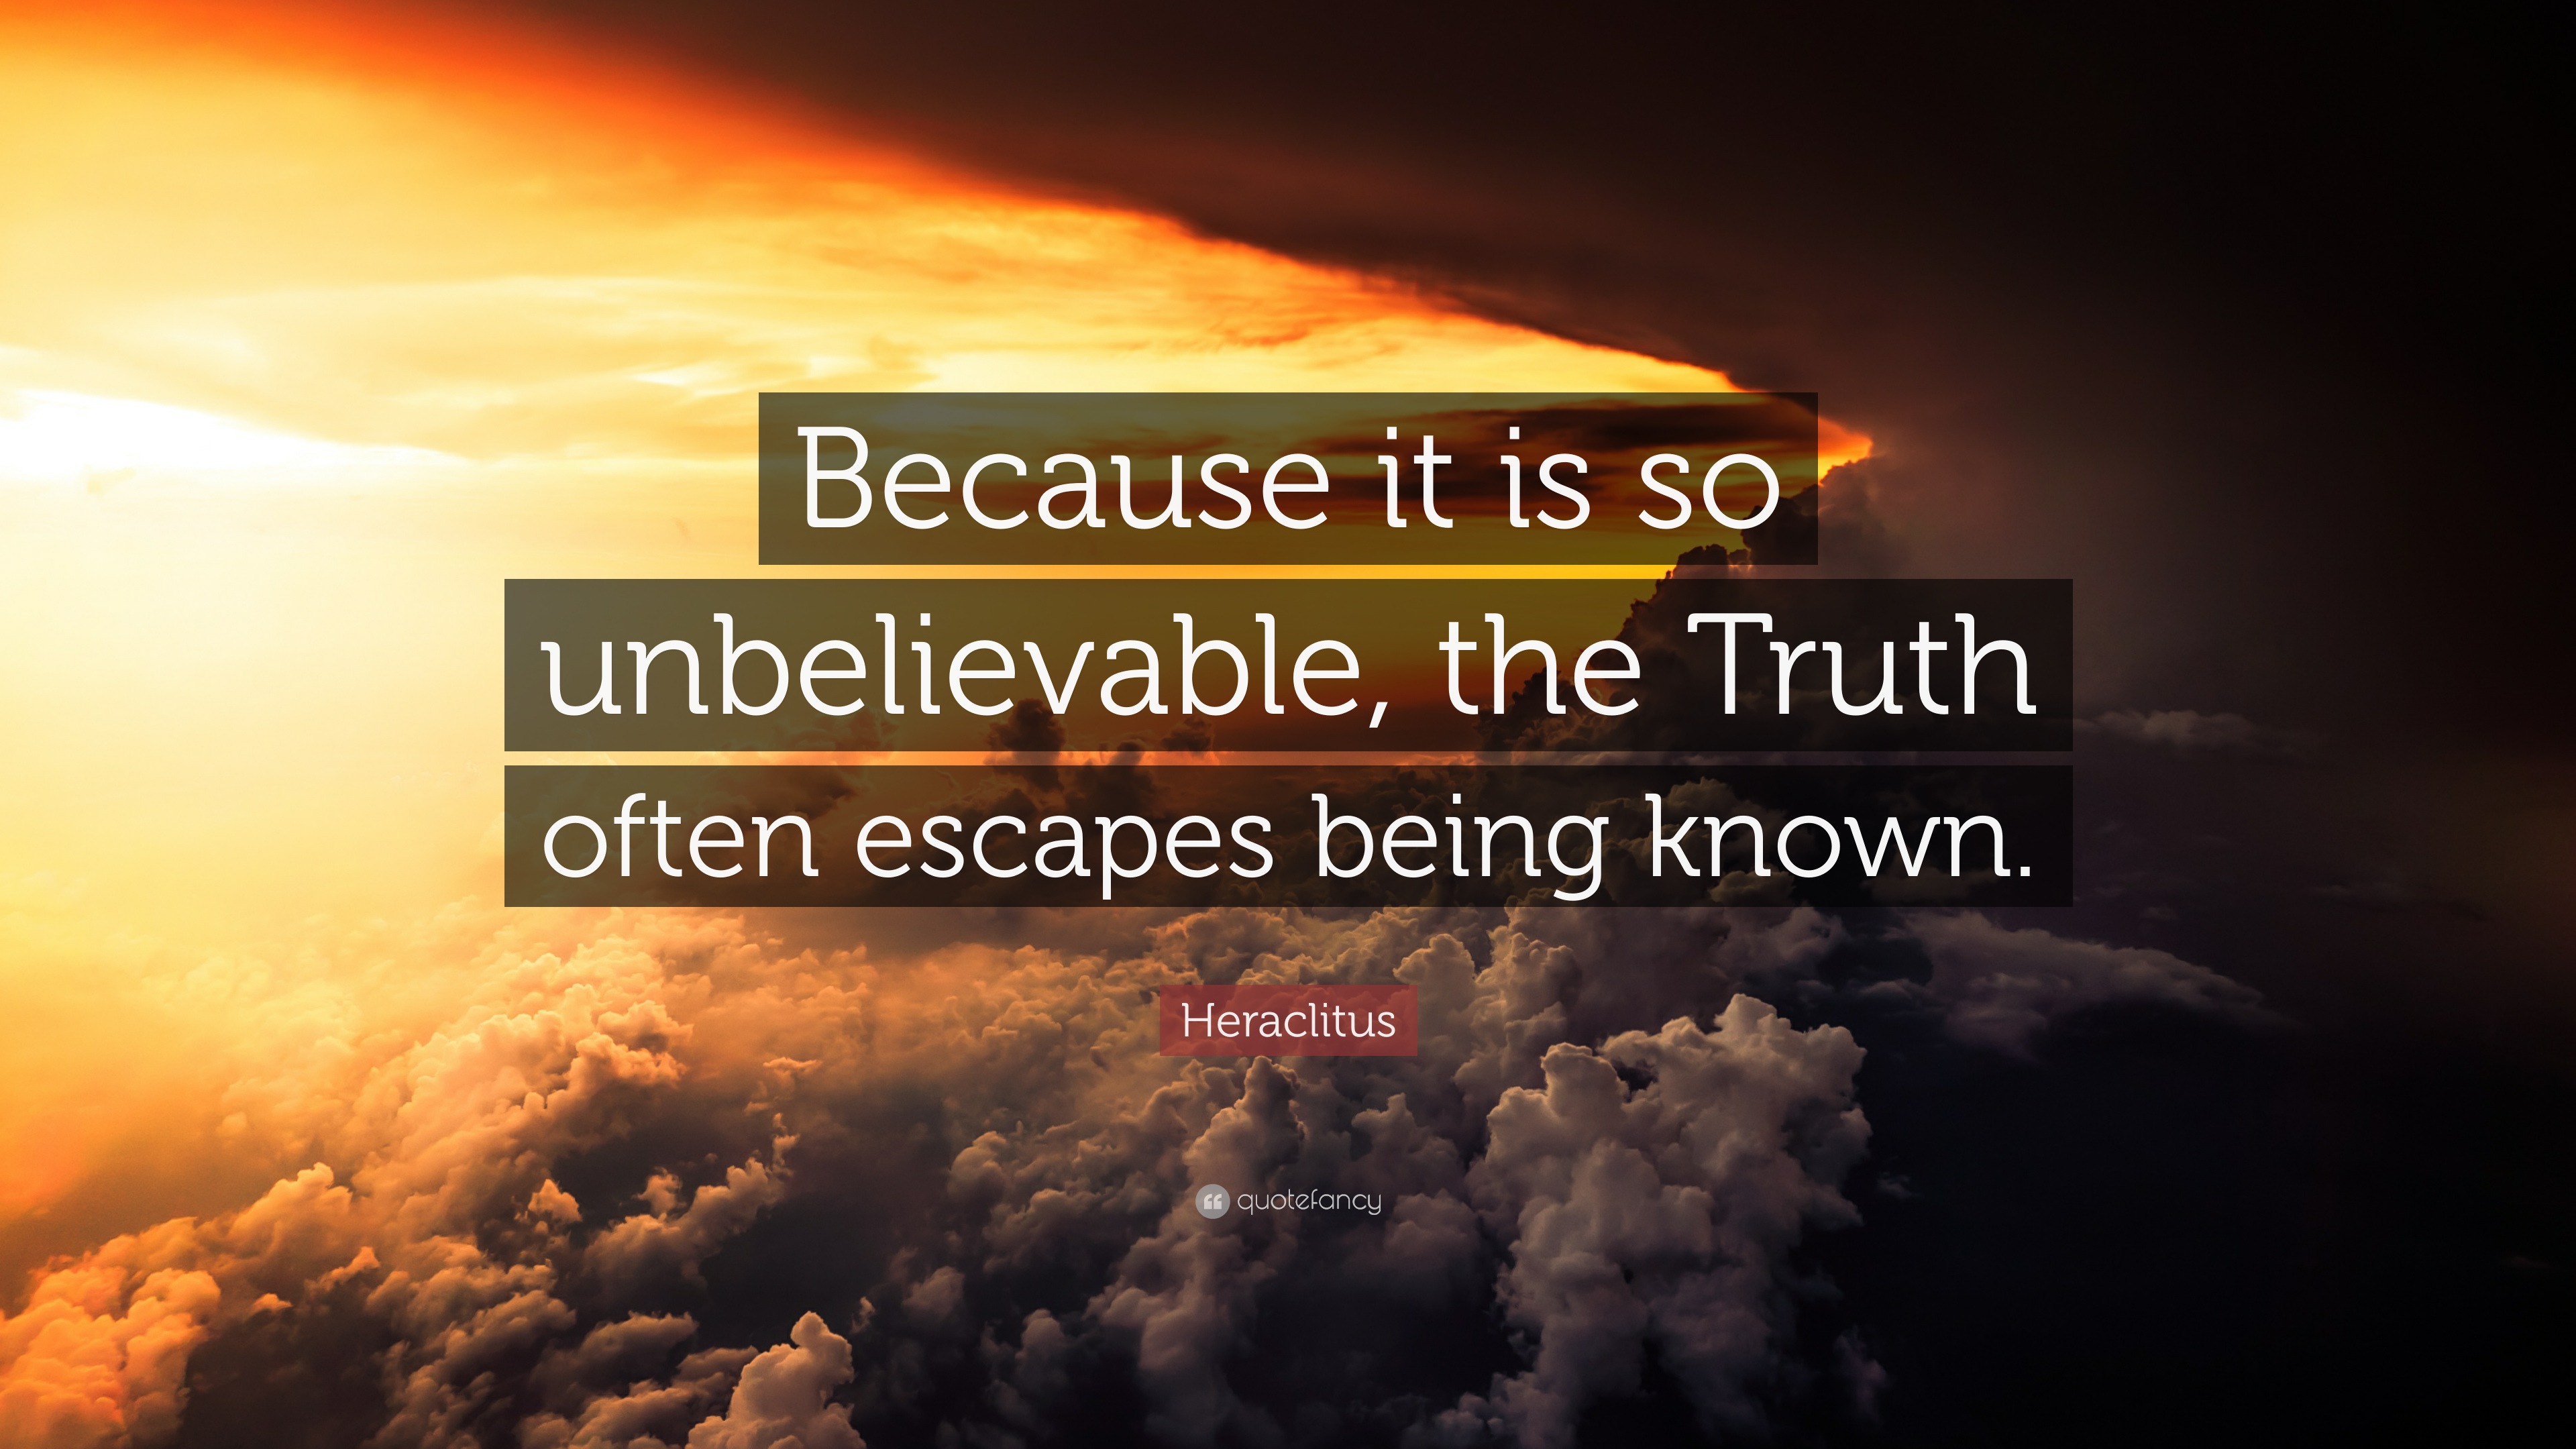 Heraclitus Quote: "Because it is so unbelievable, the Truth often escapes being known." (9 ...